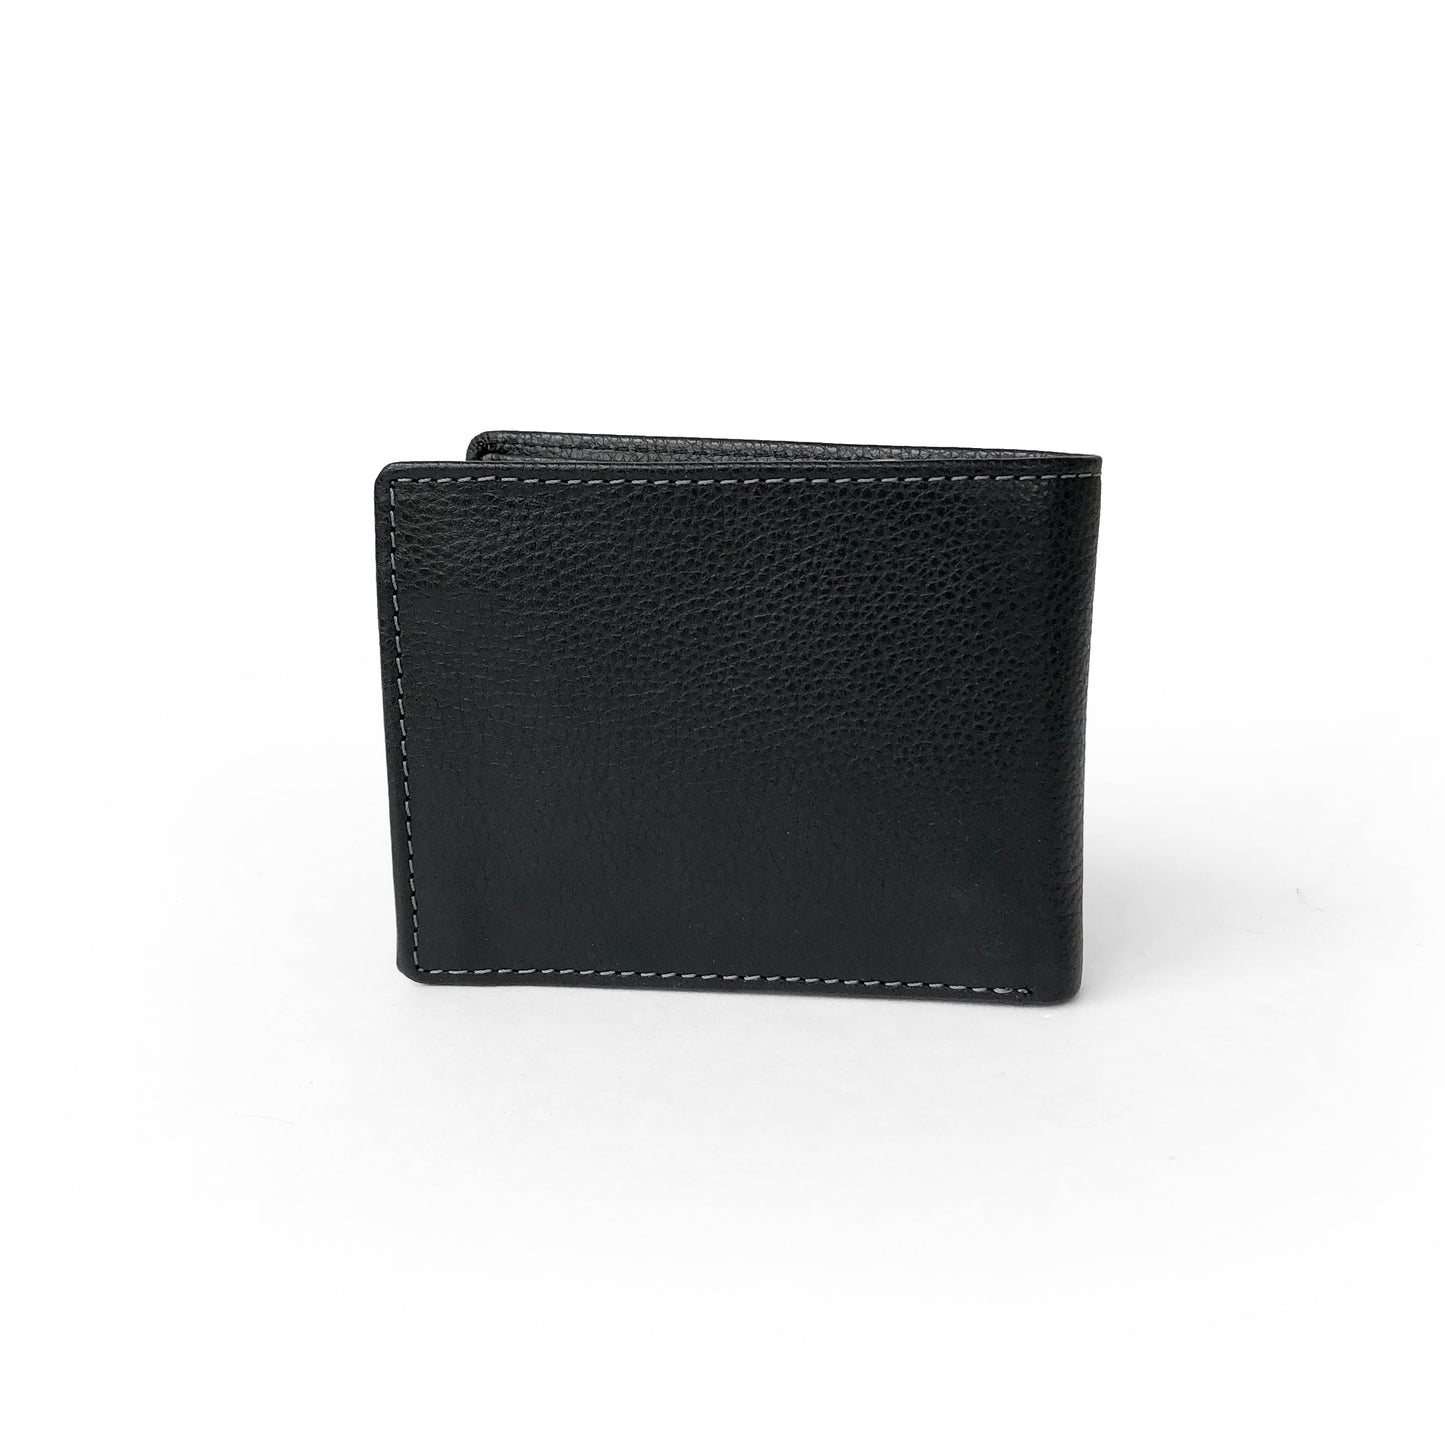 Men's Slim Full Leather Wallet with Zippered Pocket